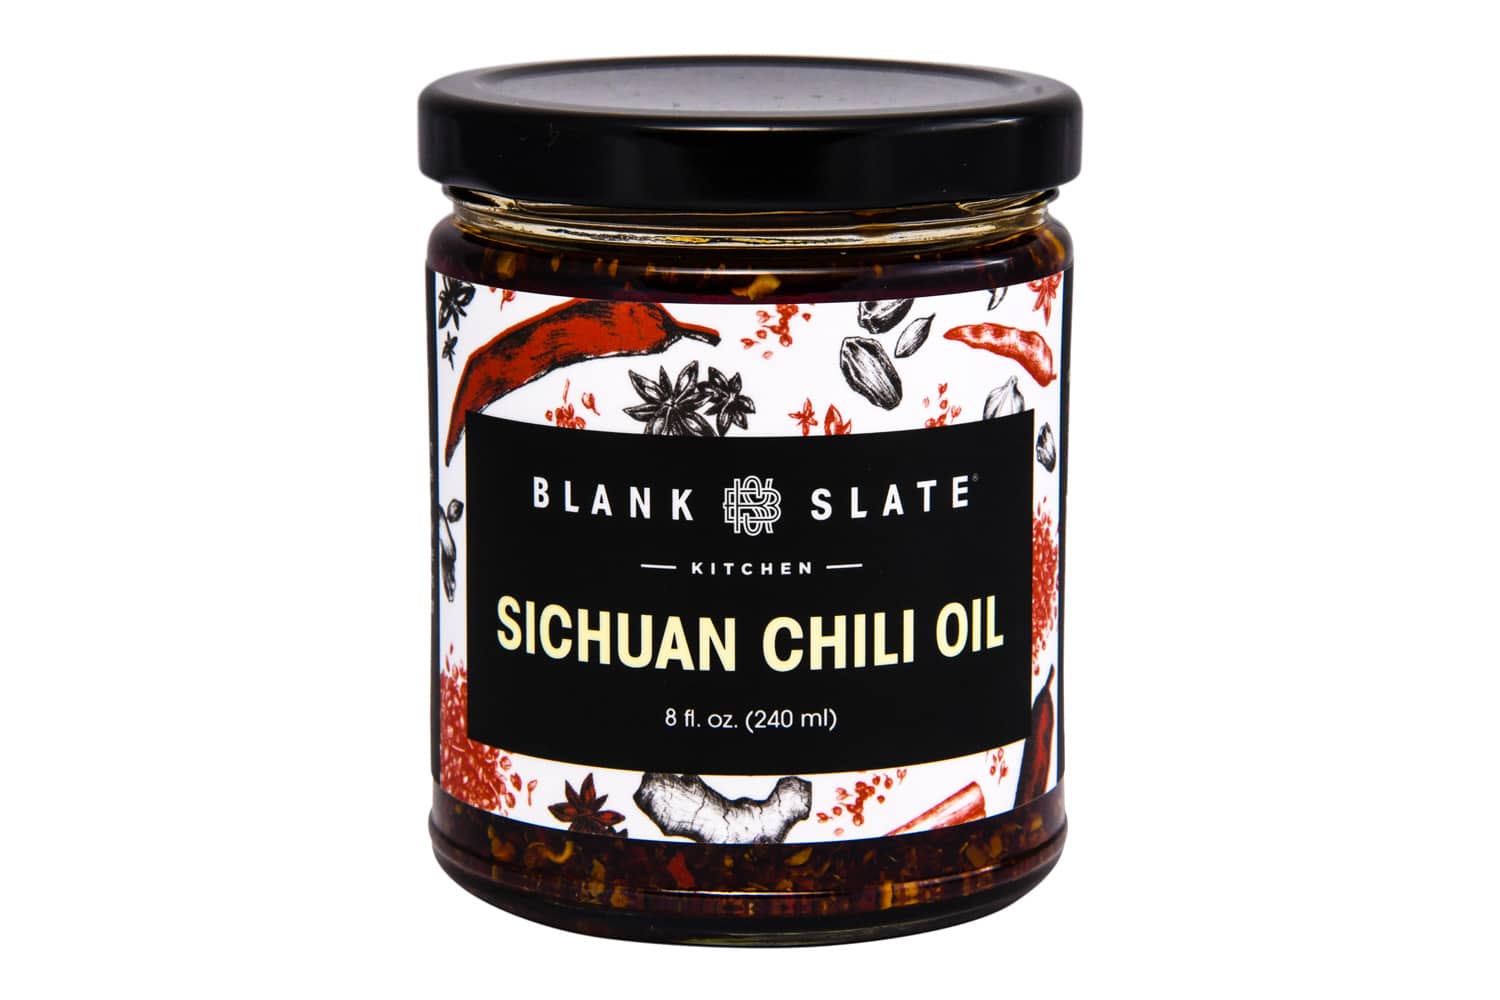 You are currently viewing Blank Slate Kitchen’s Sichuan Chili Oil